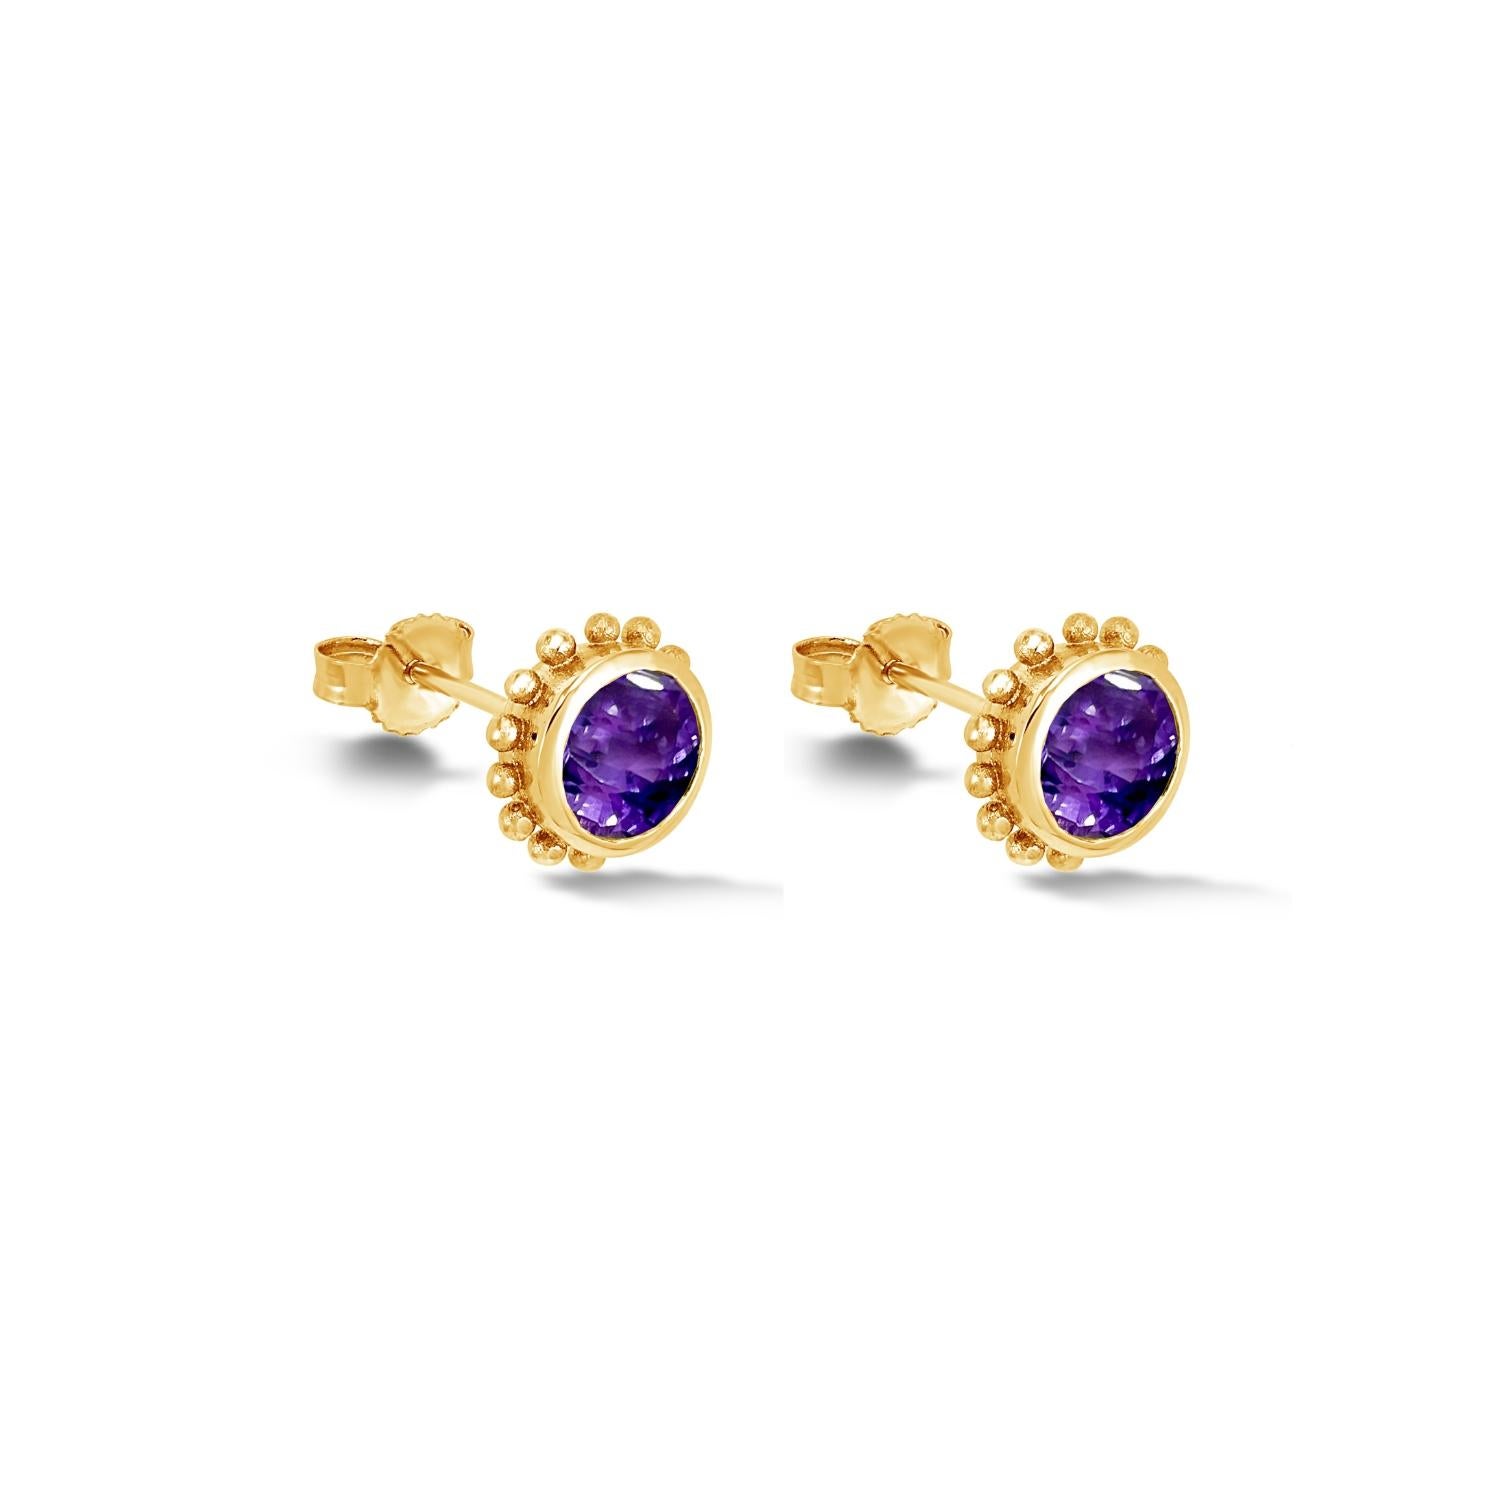 These elegant amethyst stud earrings are made in solid 14k yellow gold and feature granulated spheres around the outside of the rub-over setting. Inspired by creatures of the coral reef, the Anemone collection is fascinating in its